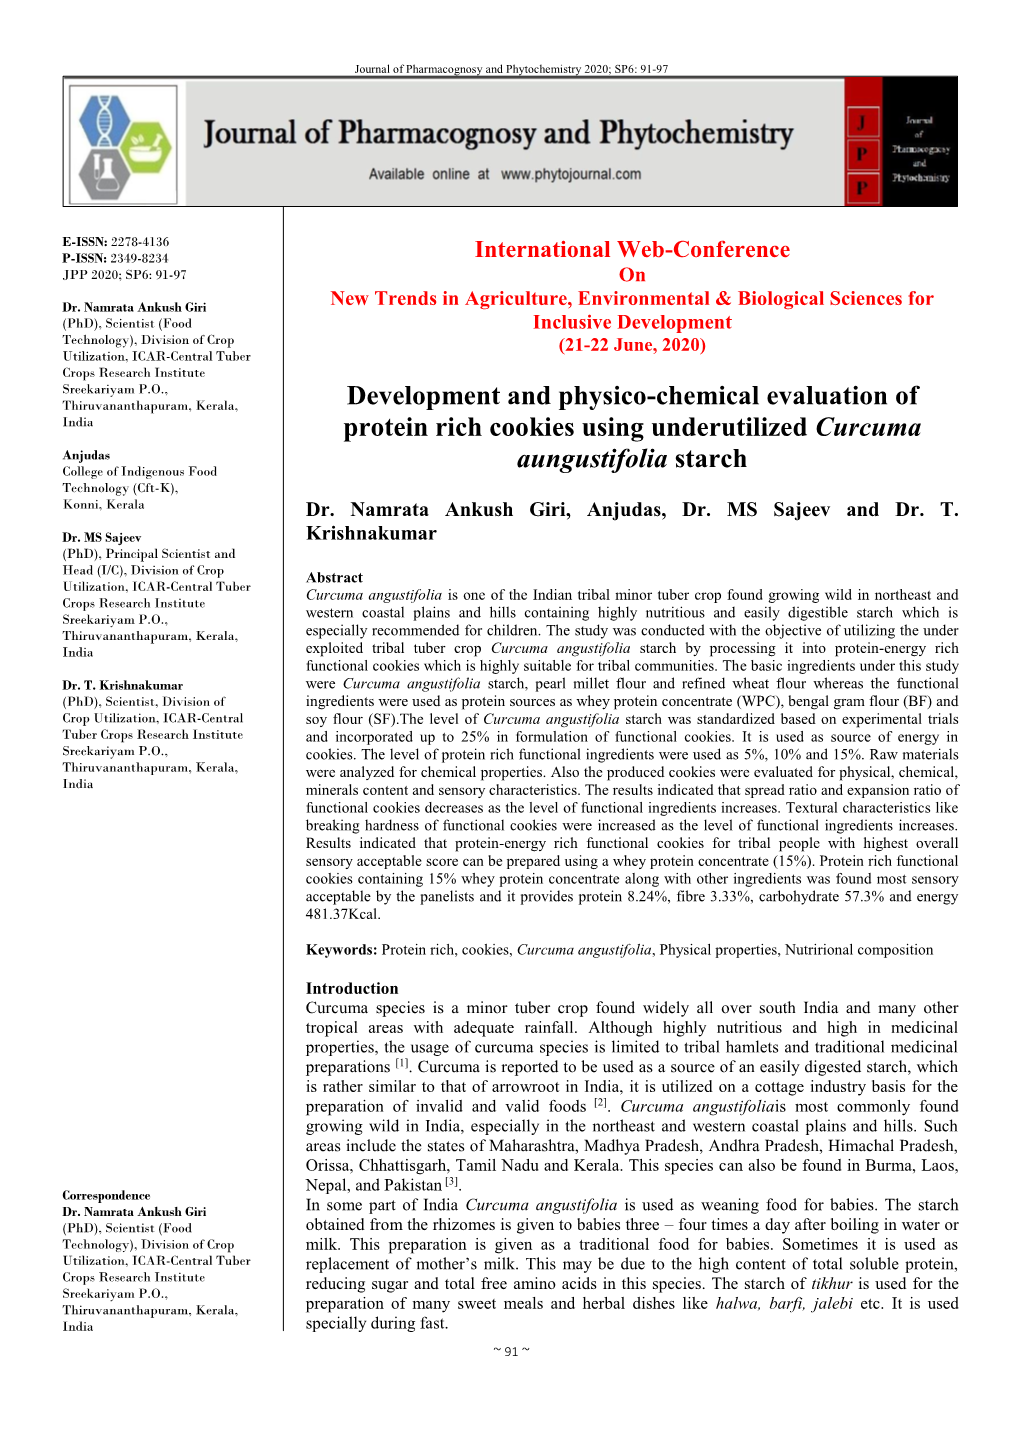 Development and Physico-Chemical Evaluation of Protein Rich Cookies